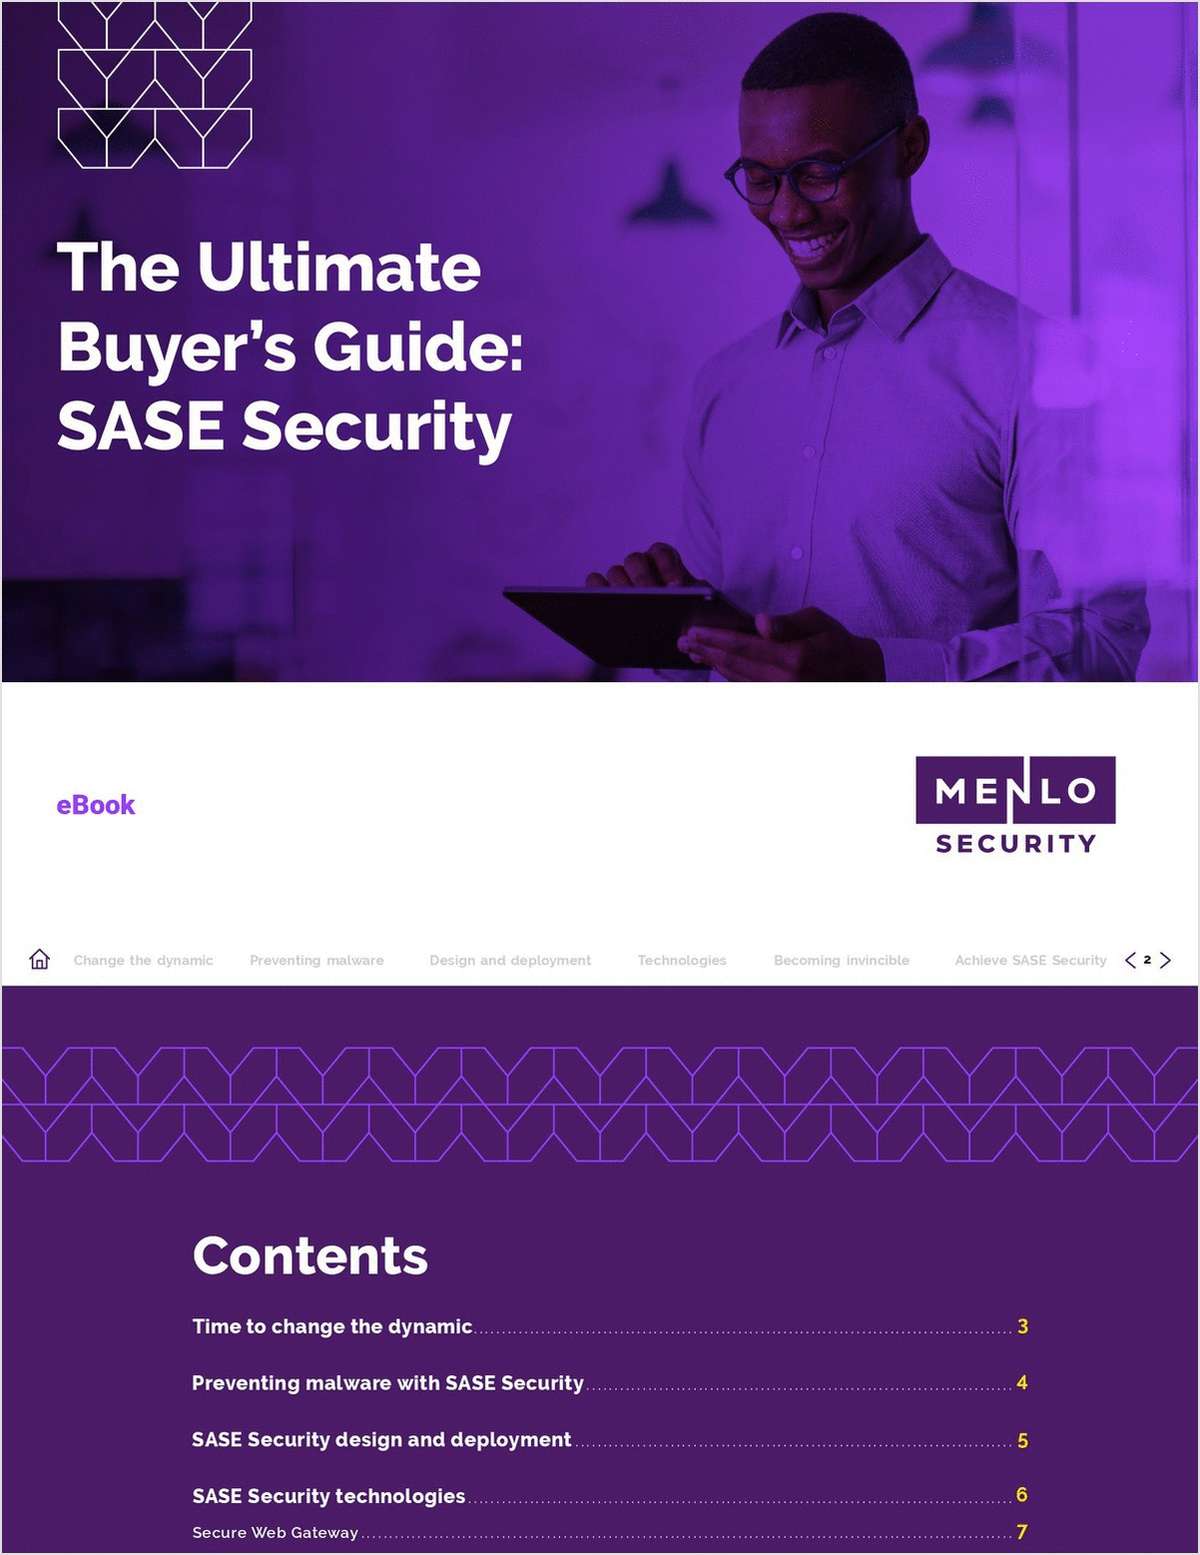 The Ultimate Buyer's Guide: SASE Security